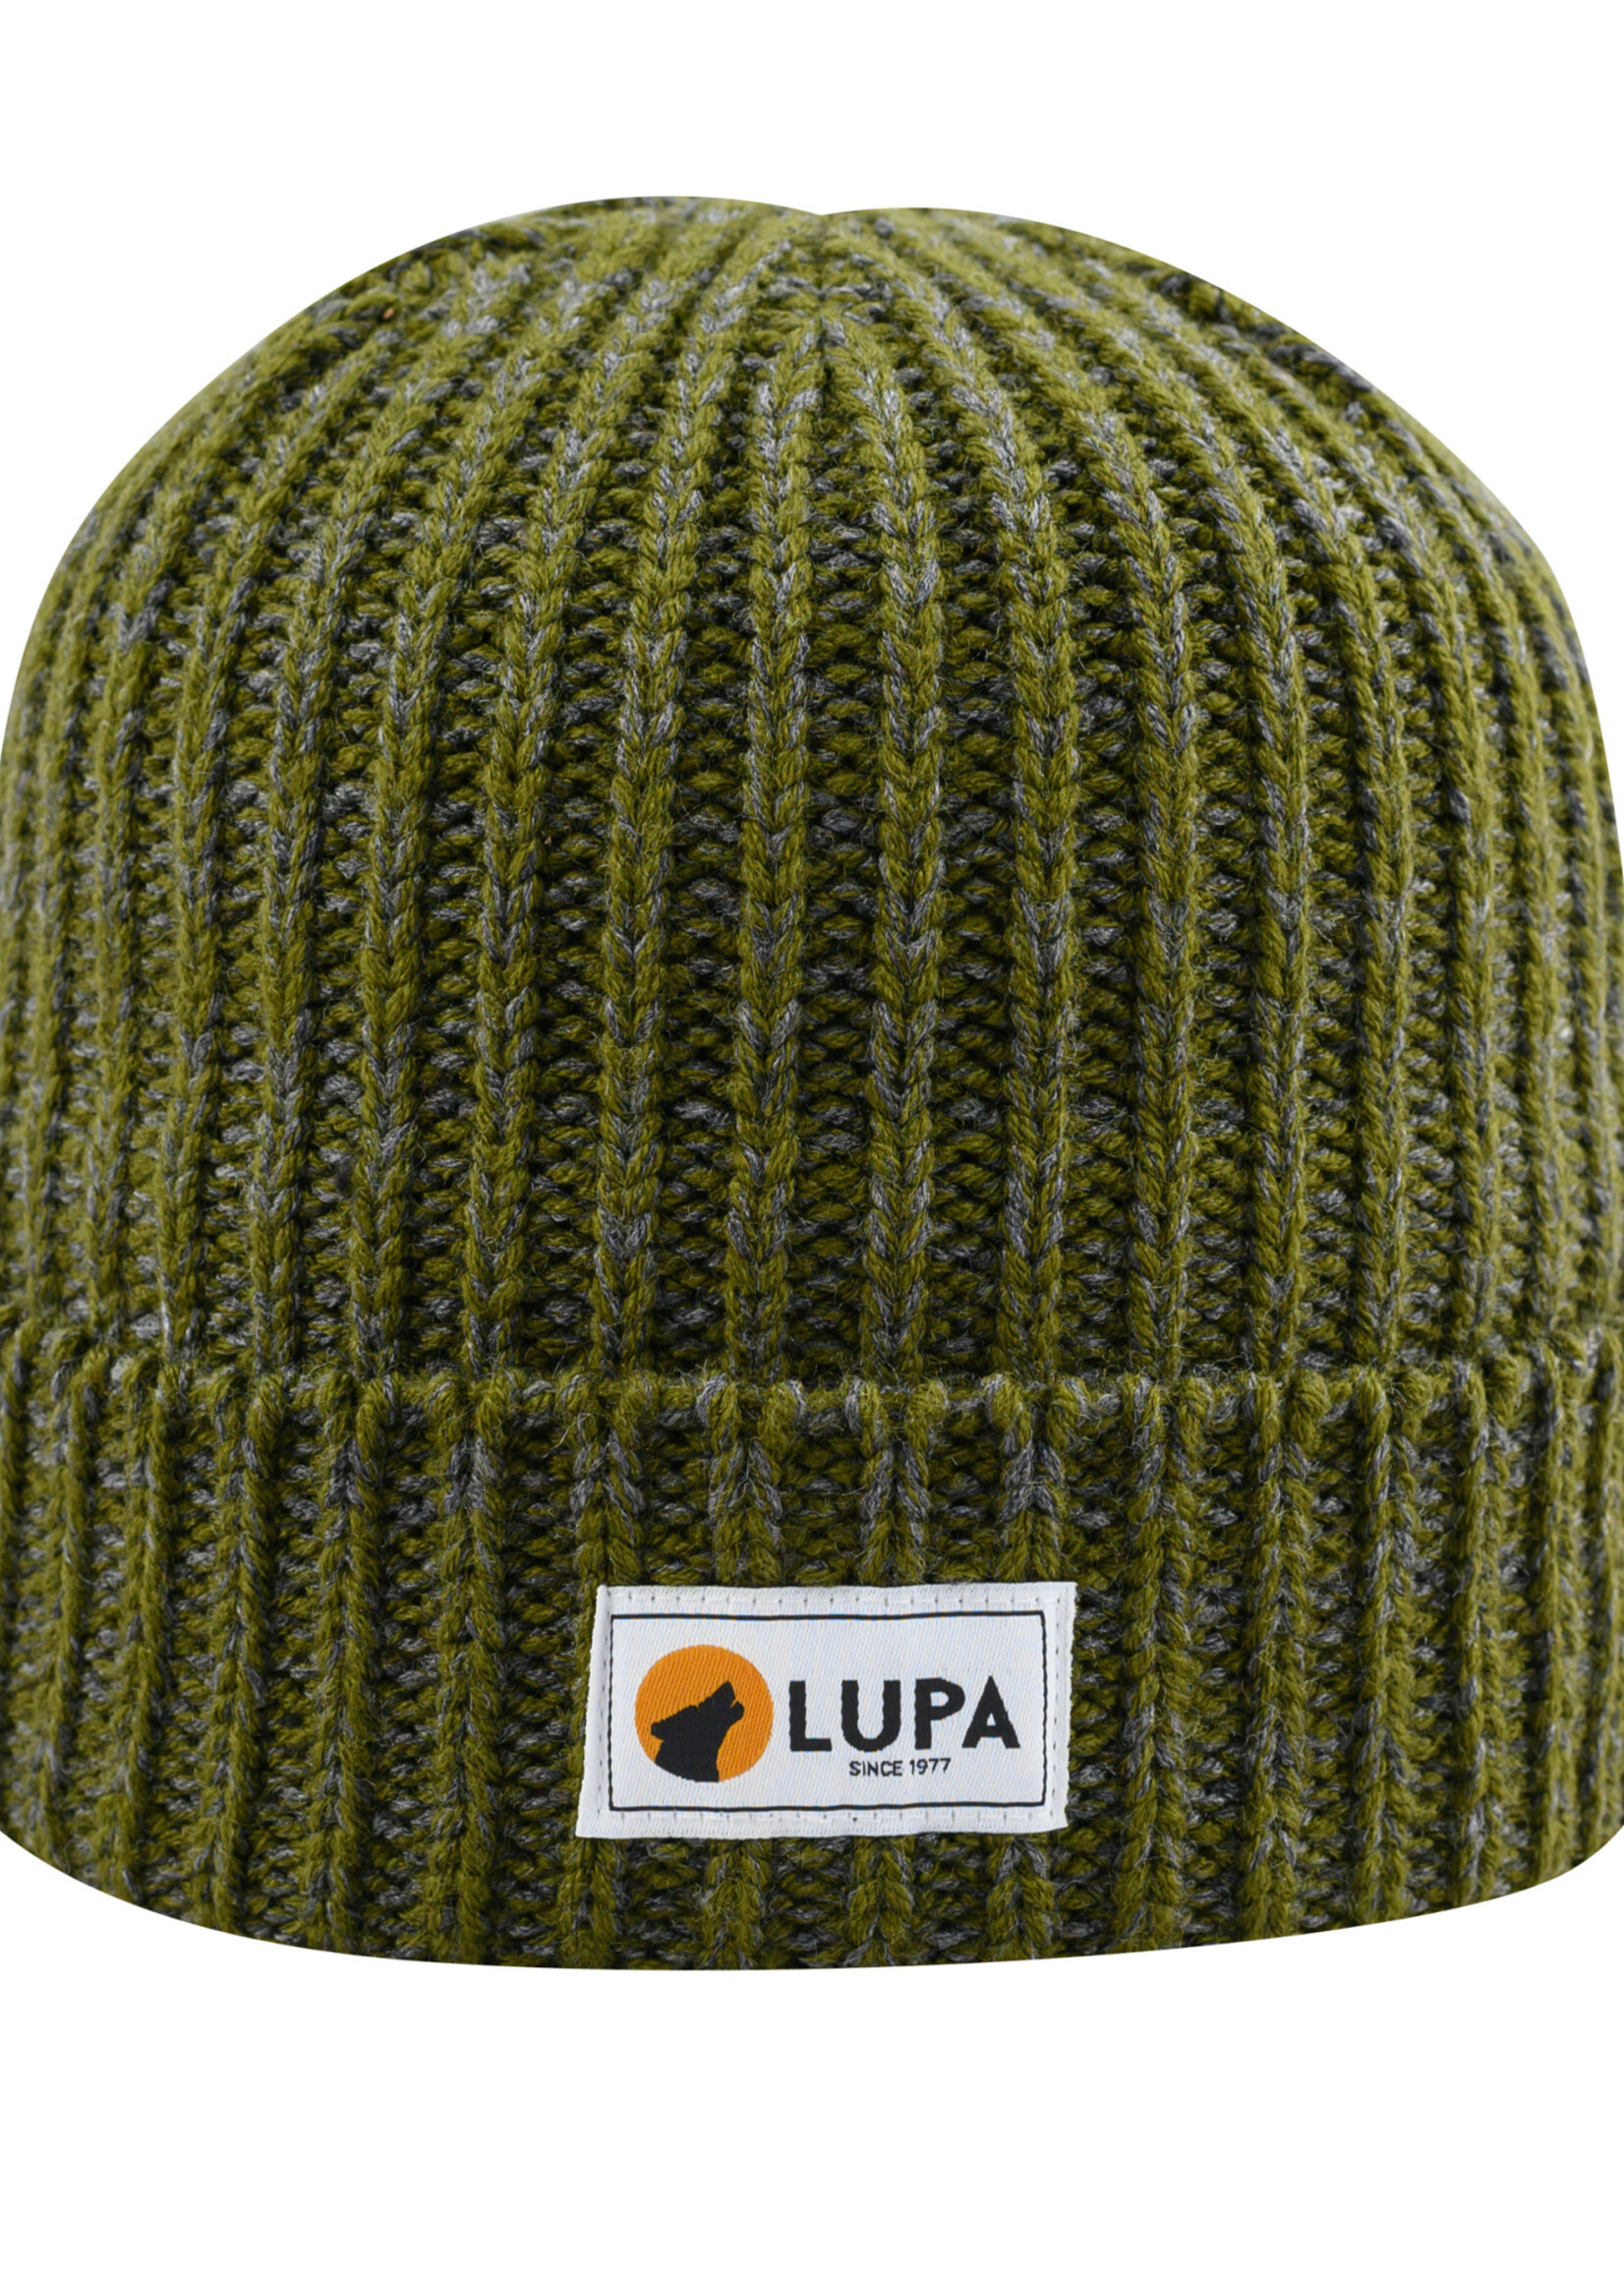 Lupa Tuque Froid Extreme Adulte | Canadian-made Extreme Cold Beanie (Adult)